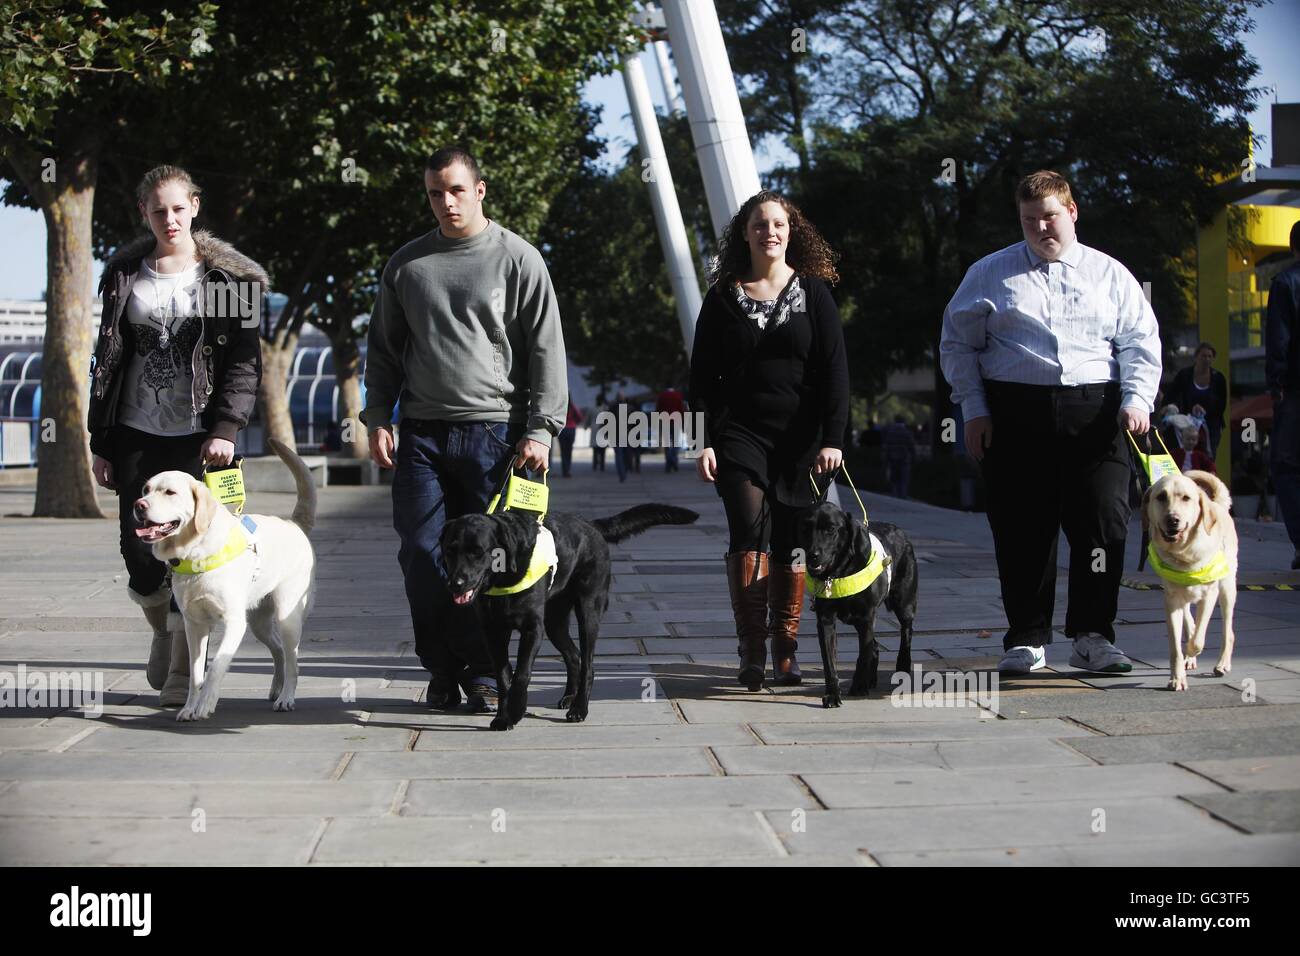 The first four people under sixteen to qualify for a Guide Dog in the UK who were united for the first time on London's Southbank. L-R Kirsty Meinhardt 15 with Websta, Brad Ranson 16 with Lance, Andrea Cooper 18 with Cara and Sidney Tamblin 18 with Jamie. Press Association Photo. Date Sunday 04 October 2009. Over 18,000 blind and partially sighted youngsters are missing out on crucial help with mobility, independence and life skills according to research by Guide Dogs. Picture Credit should read David Parry/ PA Stock Photo